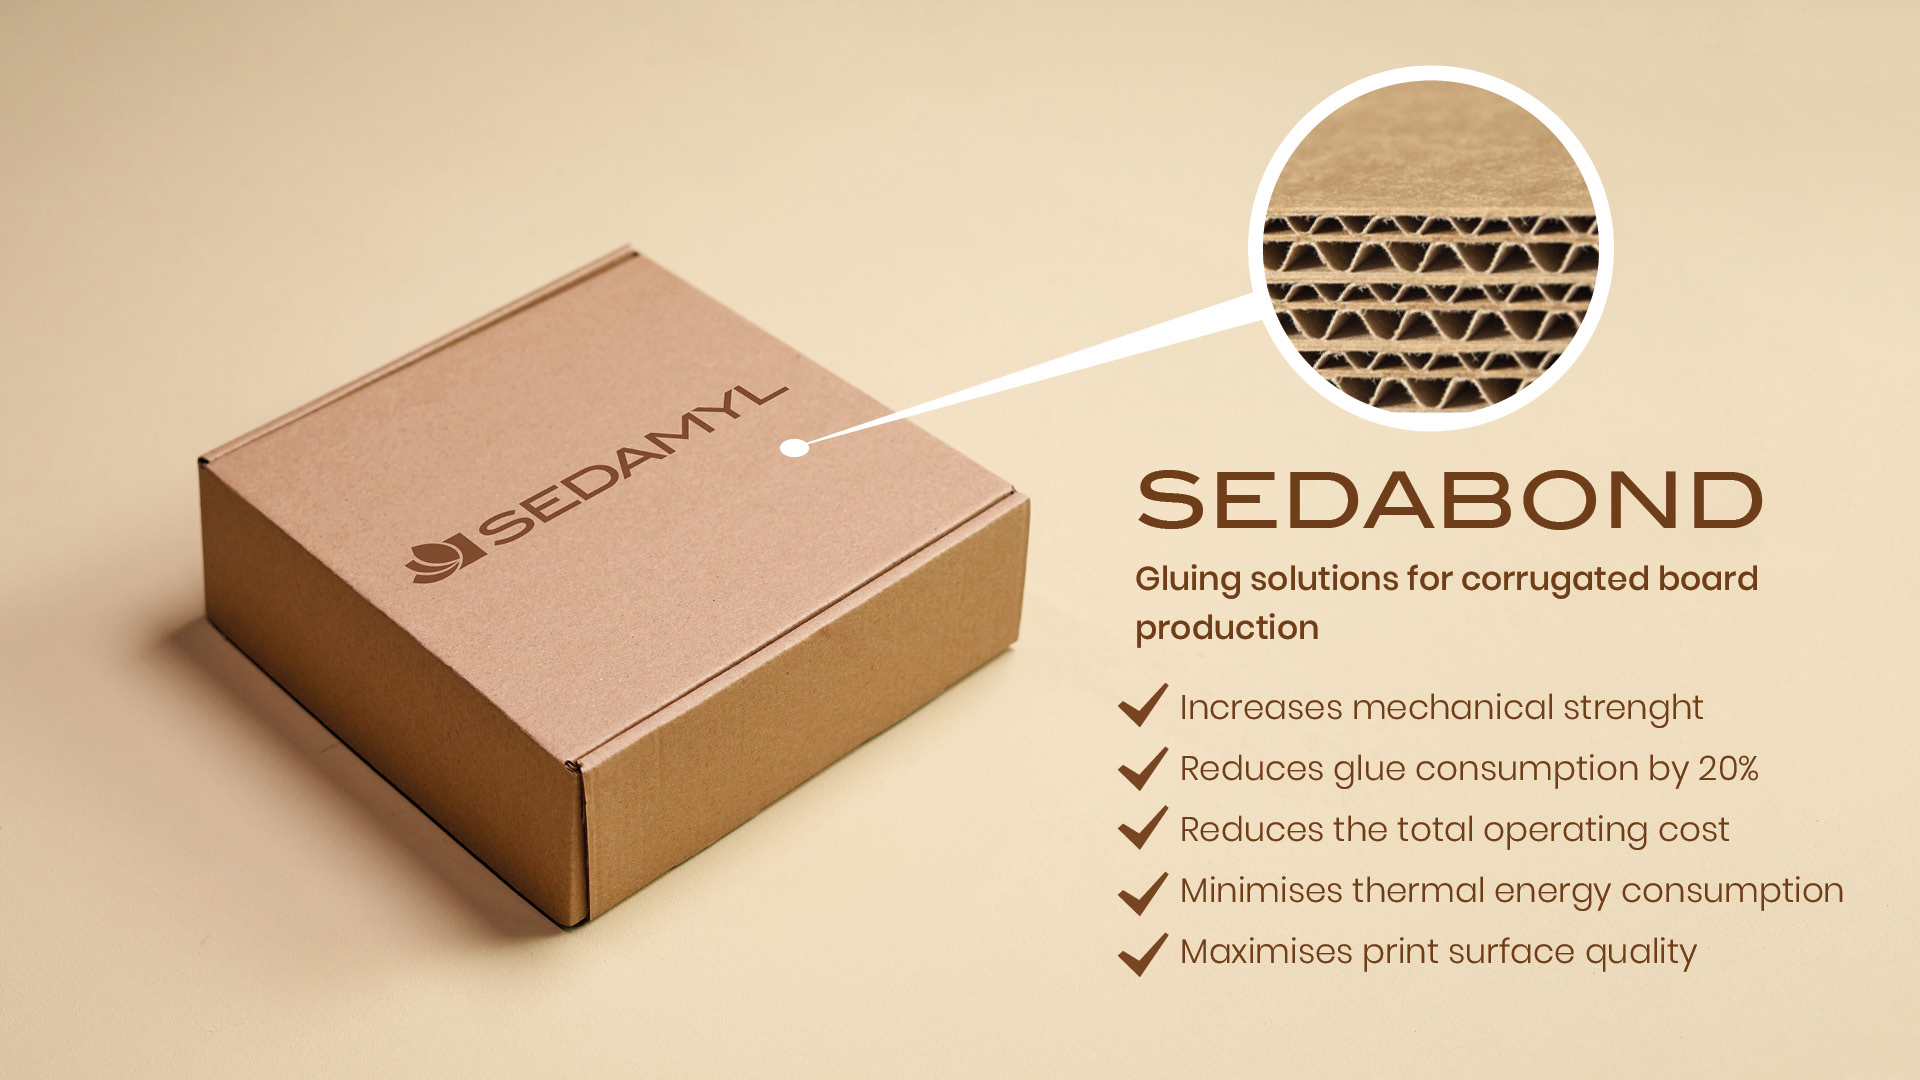 Sedabond: gluing solutions for corrugated board production